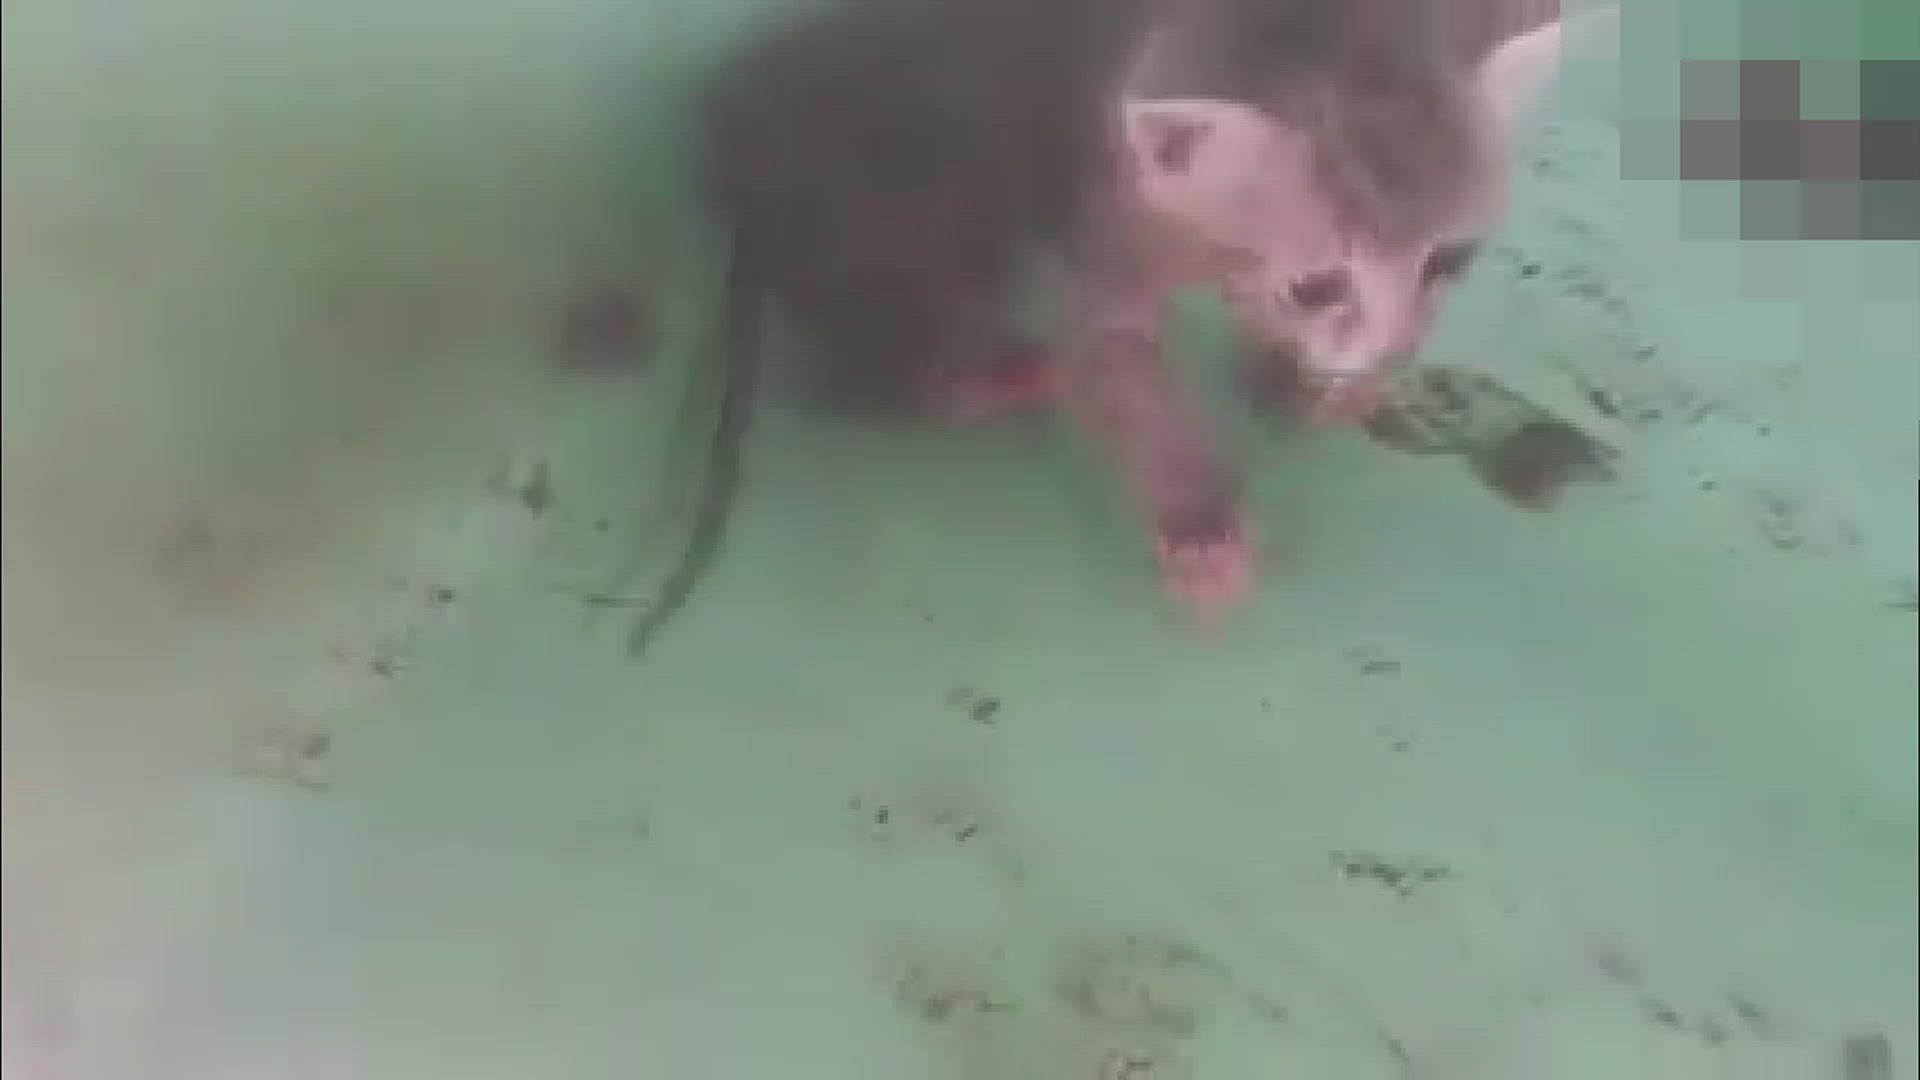 The video went viral more than two months ago and showed two kittens in poor conditions at the Port Arthur Animal Shelter.